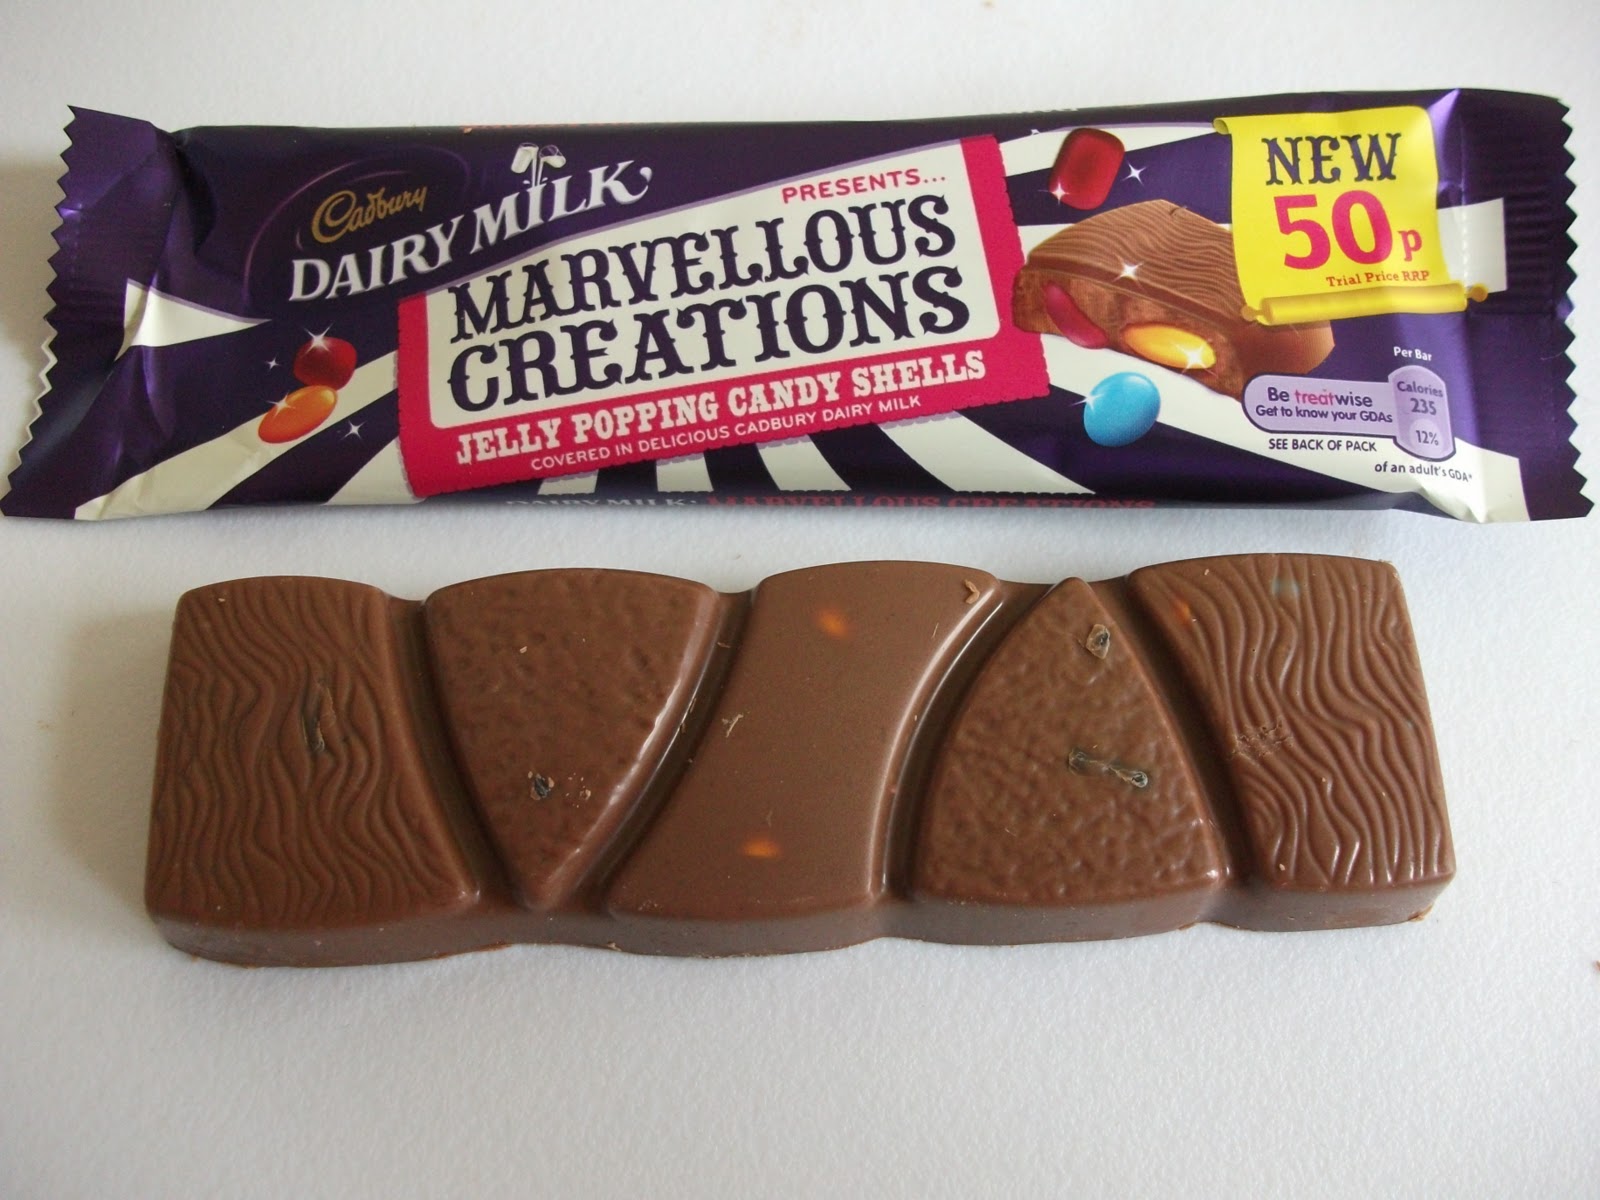 Cadbury Dairy Milk Marvellous Creations: Jelly Popping Candy & Cookie Nut  Crunch